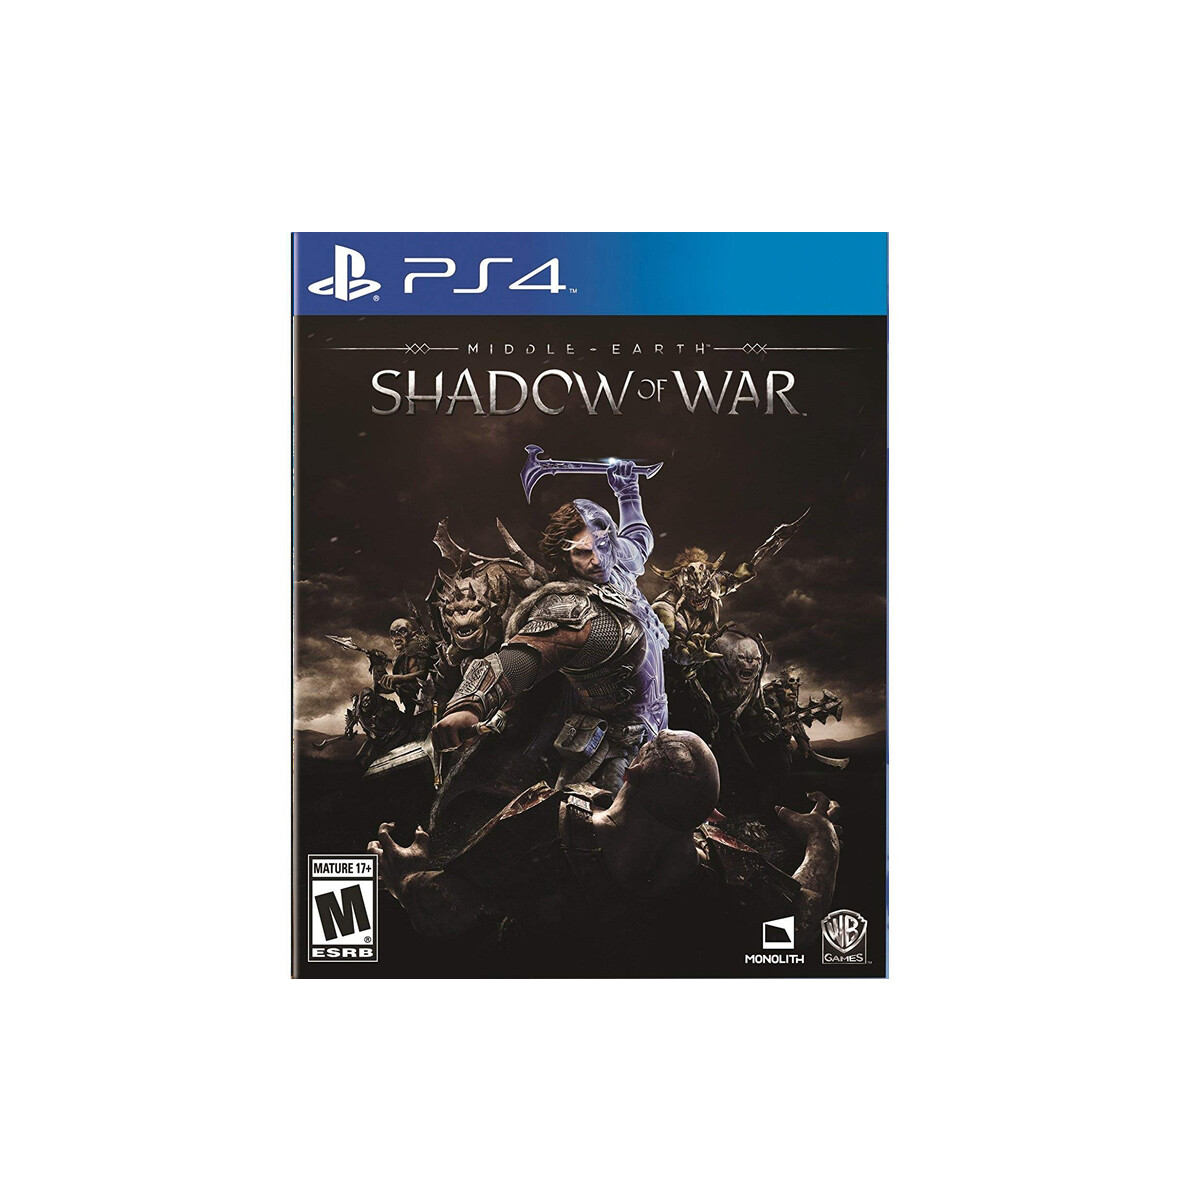 PS4 MIDDLE-EARTH: SHADOW OF WAR 